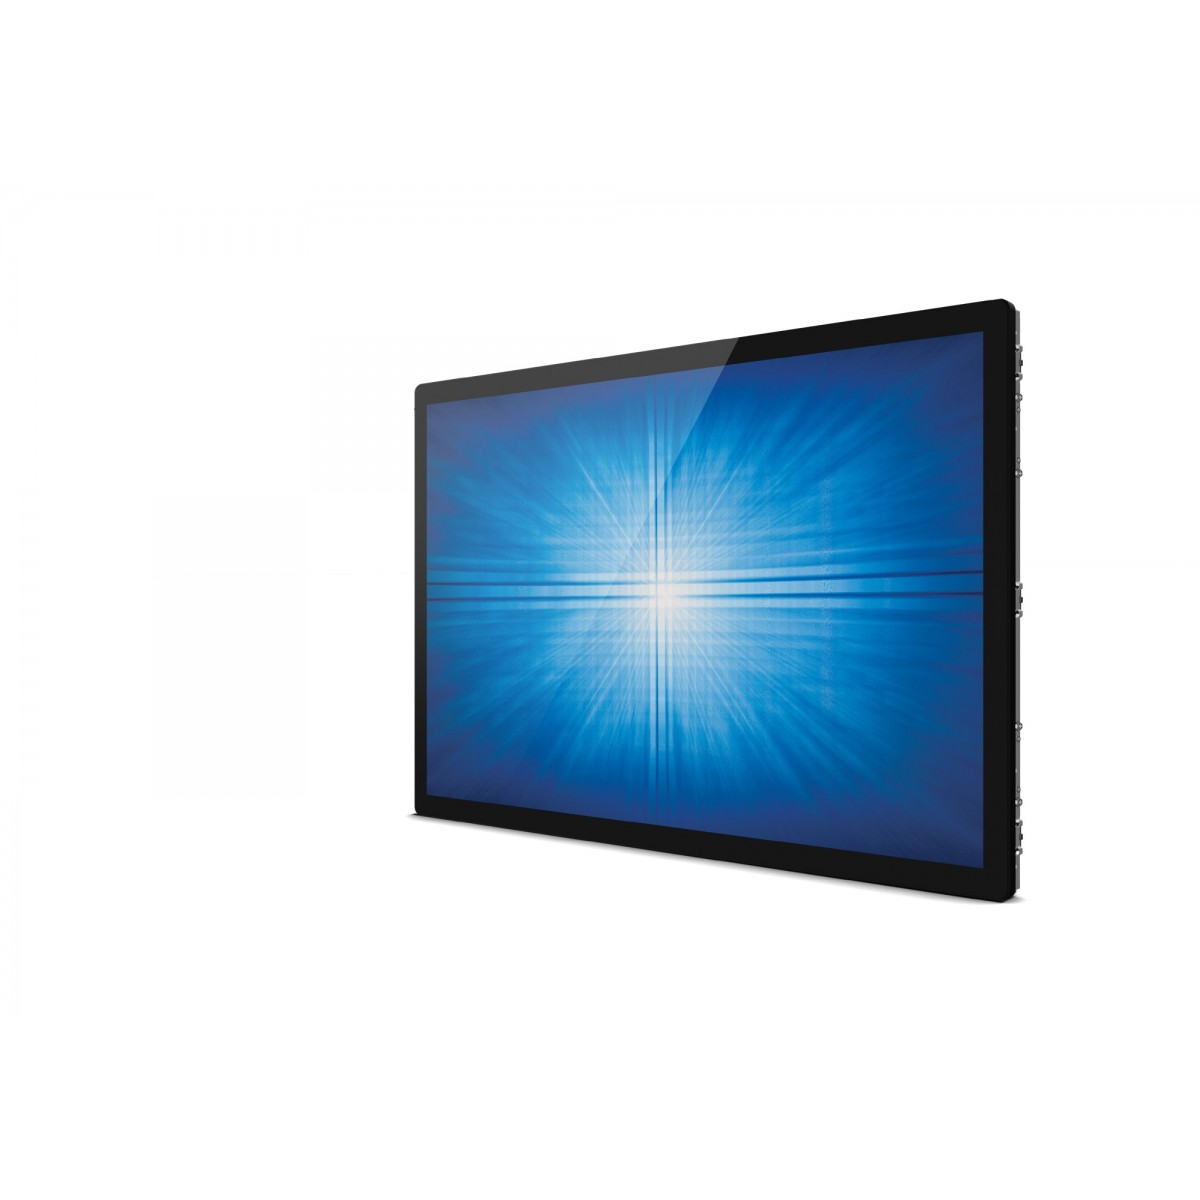 Elo 3263L 32-inch wide LCD Open Frame, Full HD, VGA  HDMI 1.4, Projected Capacitive 40-Touch with P